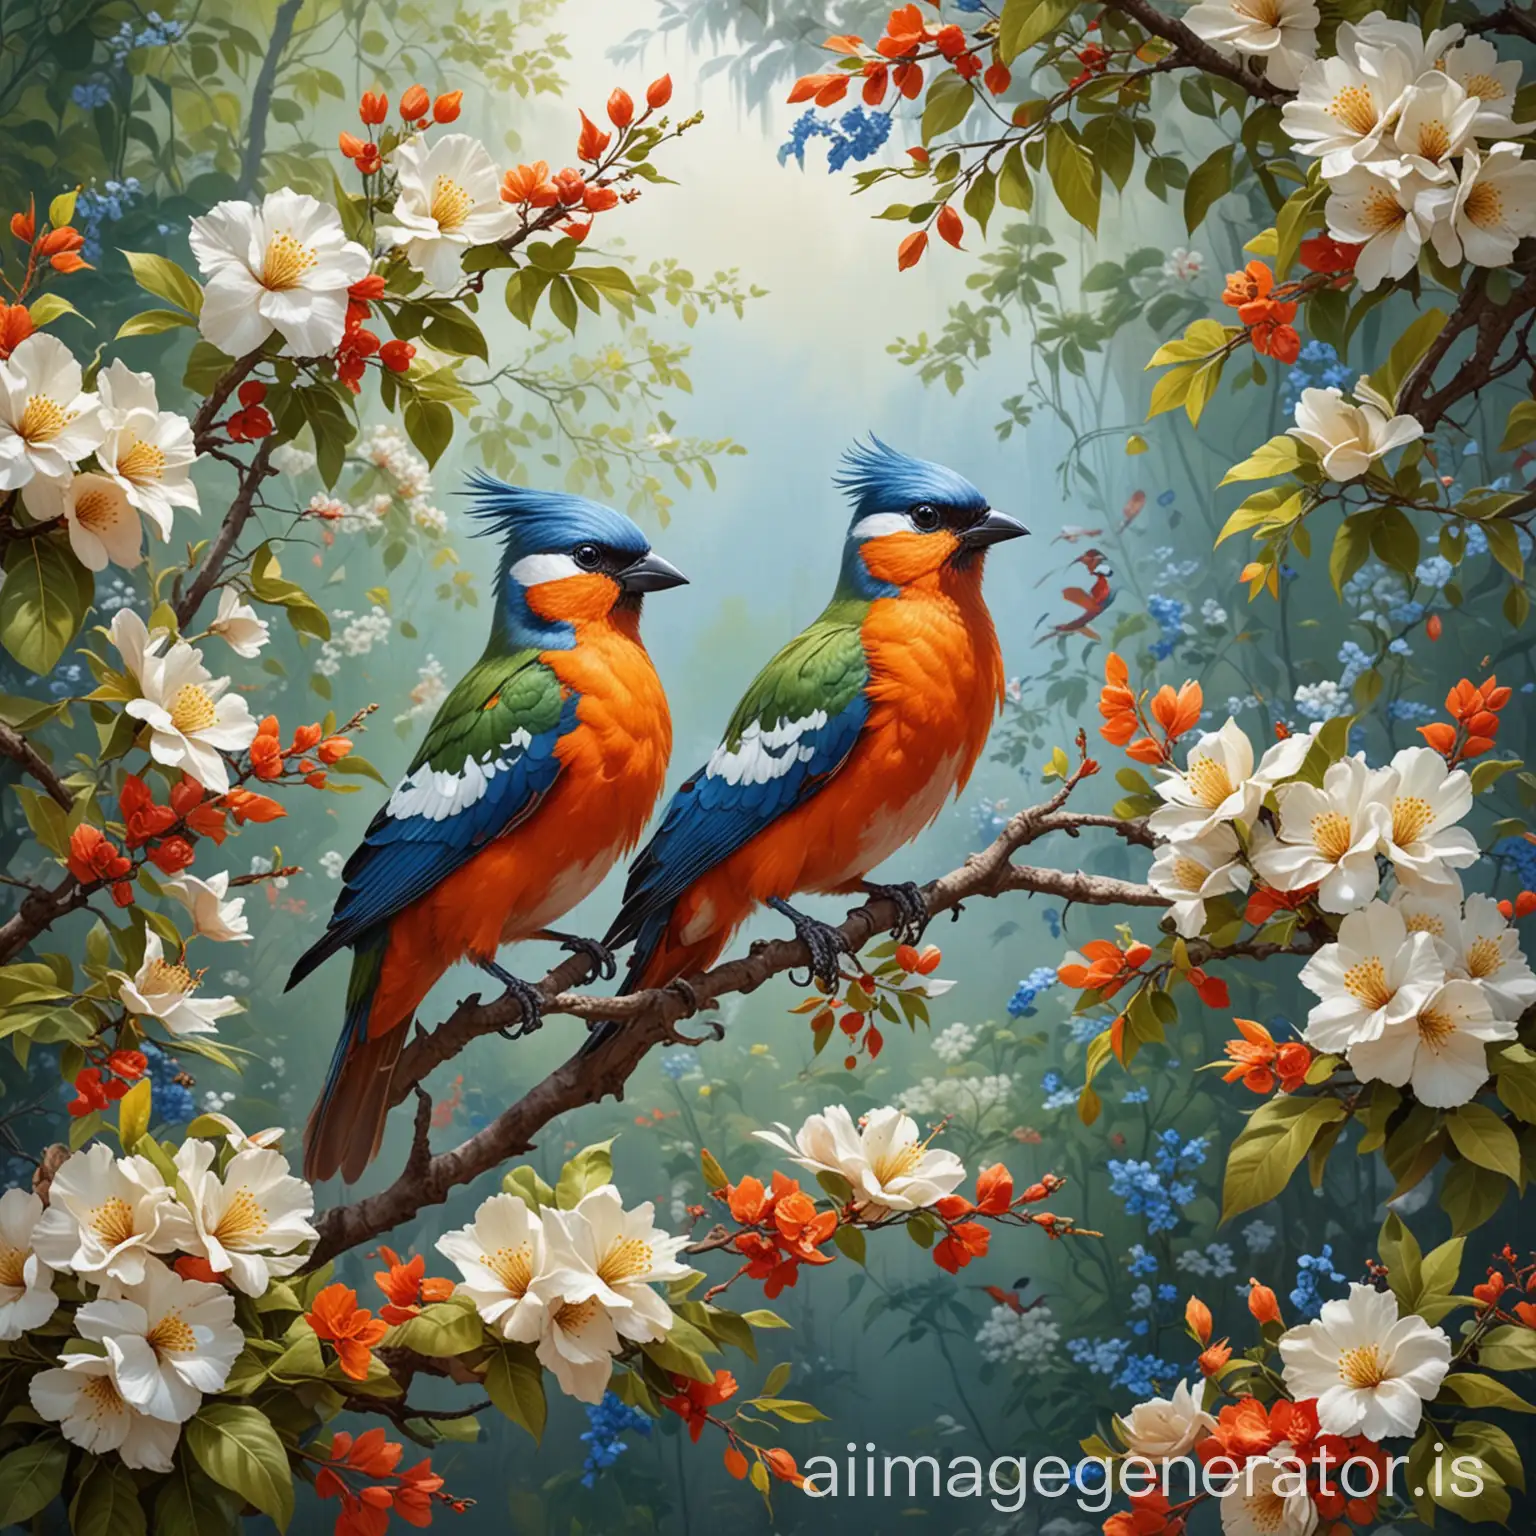 The picture shows branches of a blooming tree with white and red flowers and bright green leaves. On these branches, a pair of colorful birds sits. The birds have striking blue feathers on their wings and heads, with a bright orange-red chest and a white belly. The birds stand close to each other, adding a touch of balance and natural beauty to the scene. The background is blurry and appears in soothing colors, making the flowers and birds stand out even more. The lighting and shadows are distributed precisely, giving the image depth and realism.